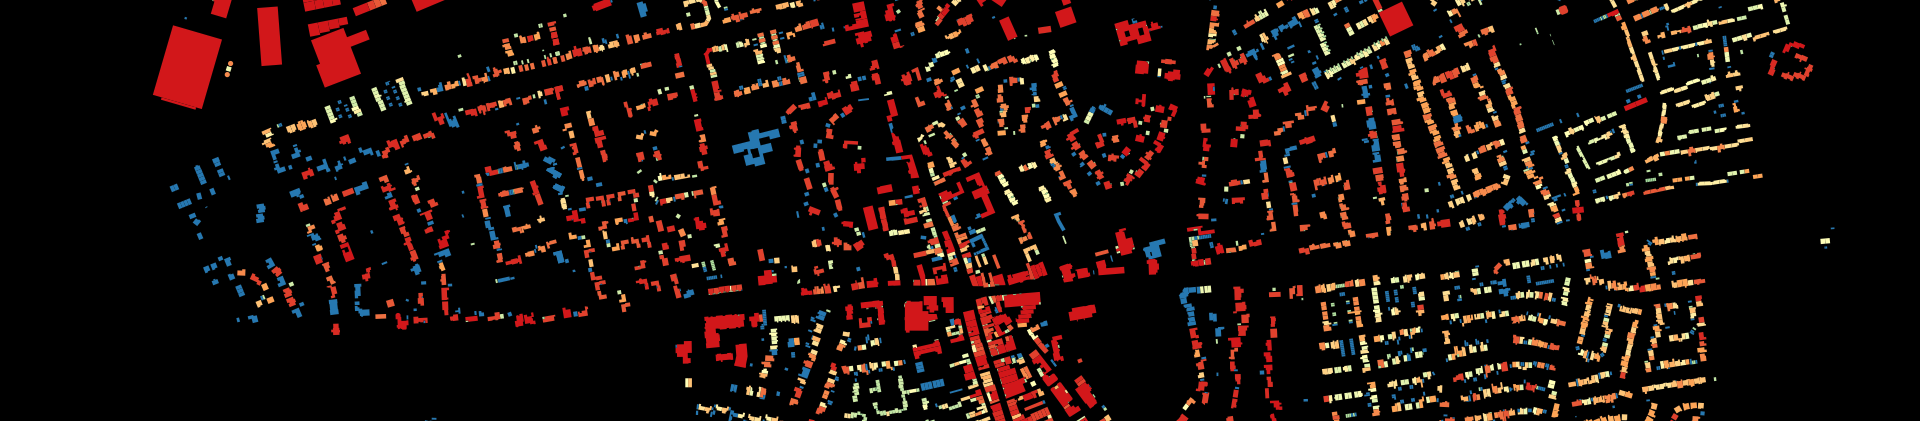 Centrality in networks of urban streets